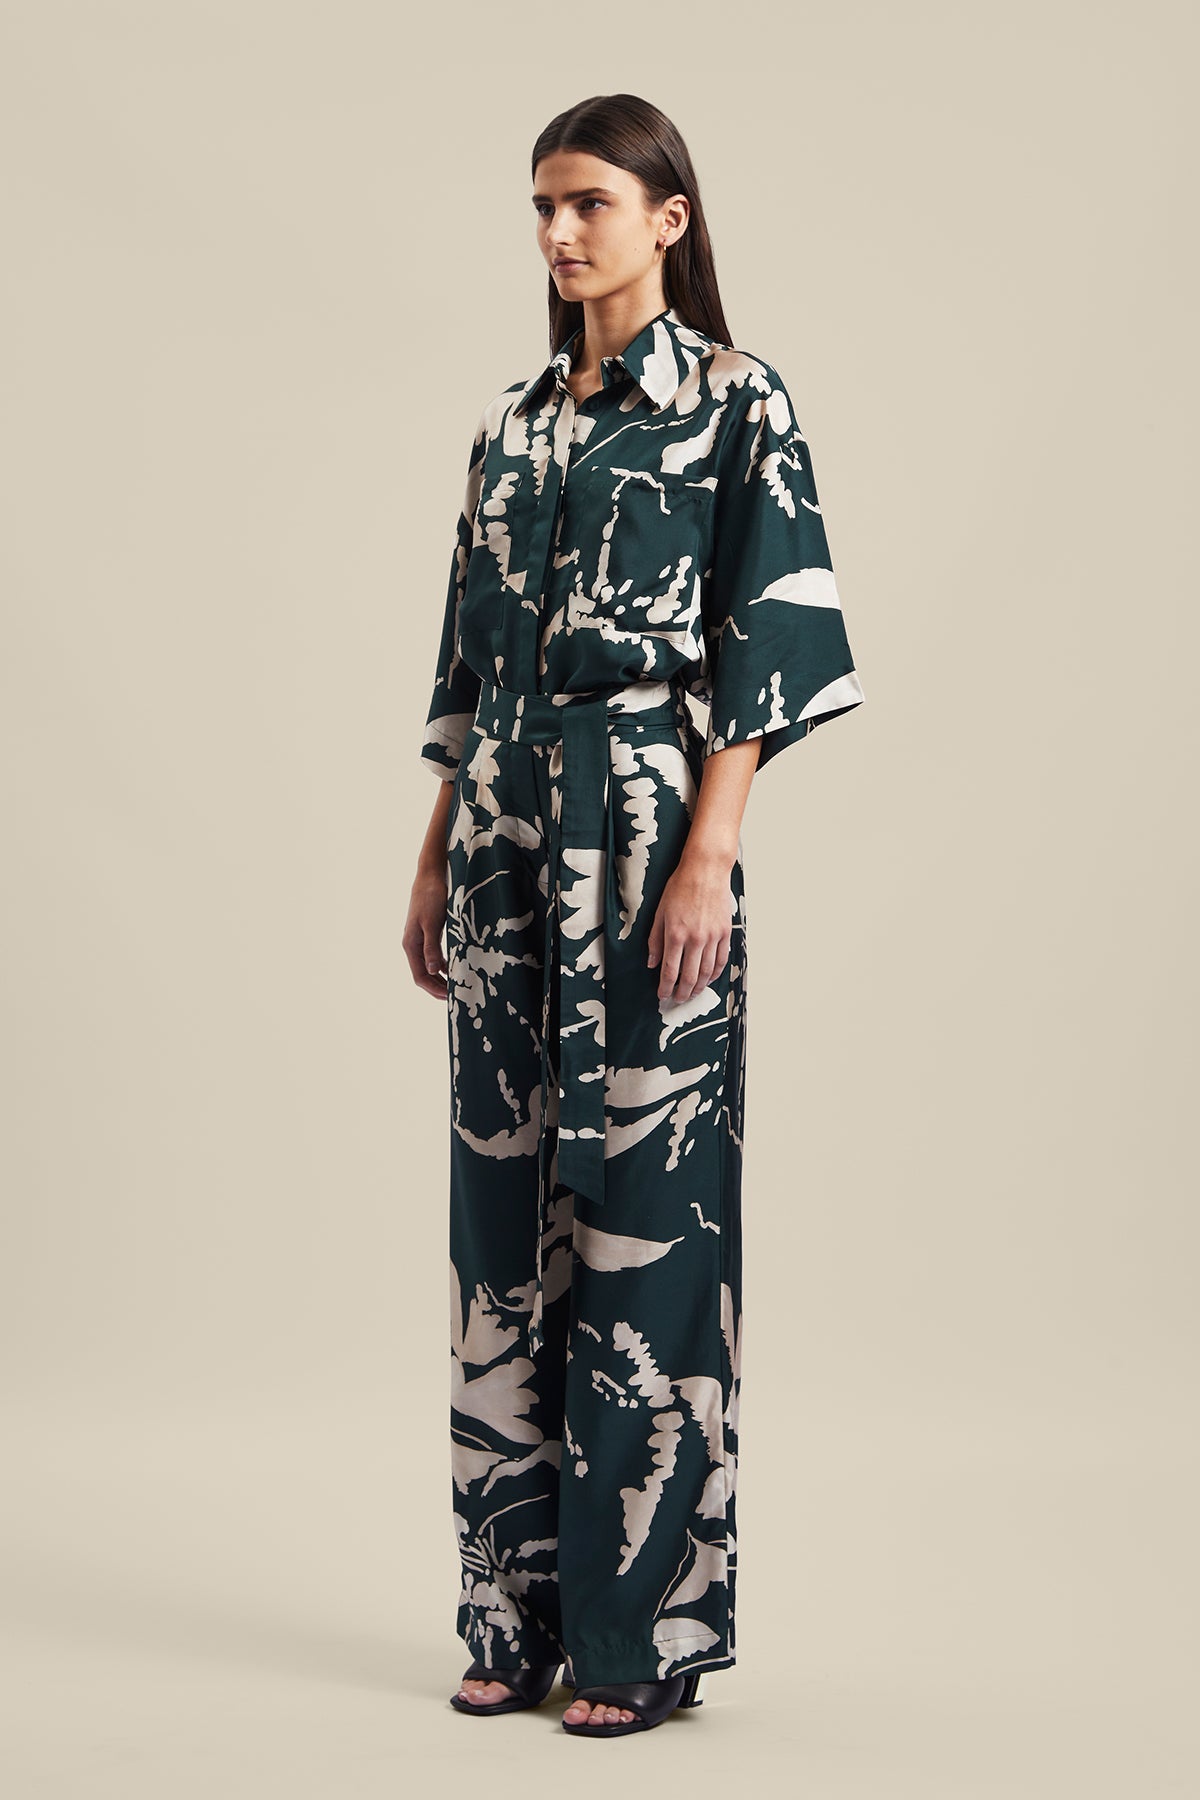 Model wearing the Memoirs Pant from Australian Fashion Designer Ginger and Smart featuring is an abstract floral in green and crème with elastic waist and drawstring detail. Worn with the matching Memoirs Blouse.